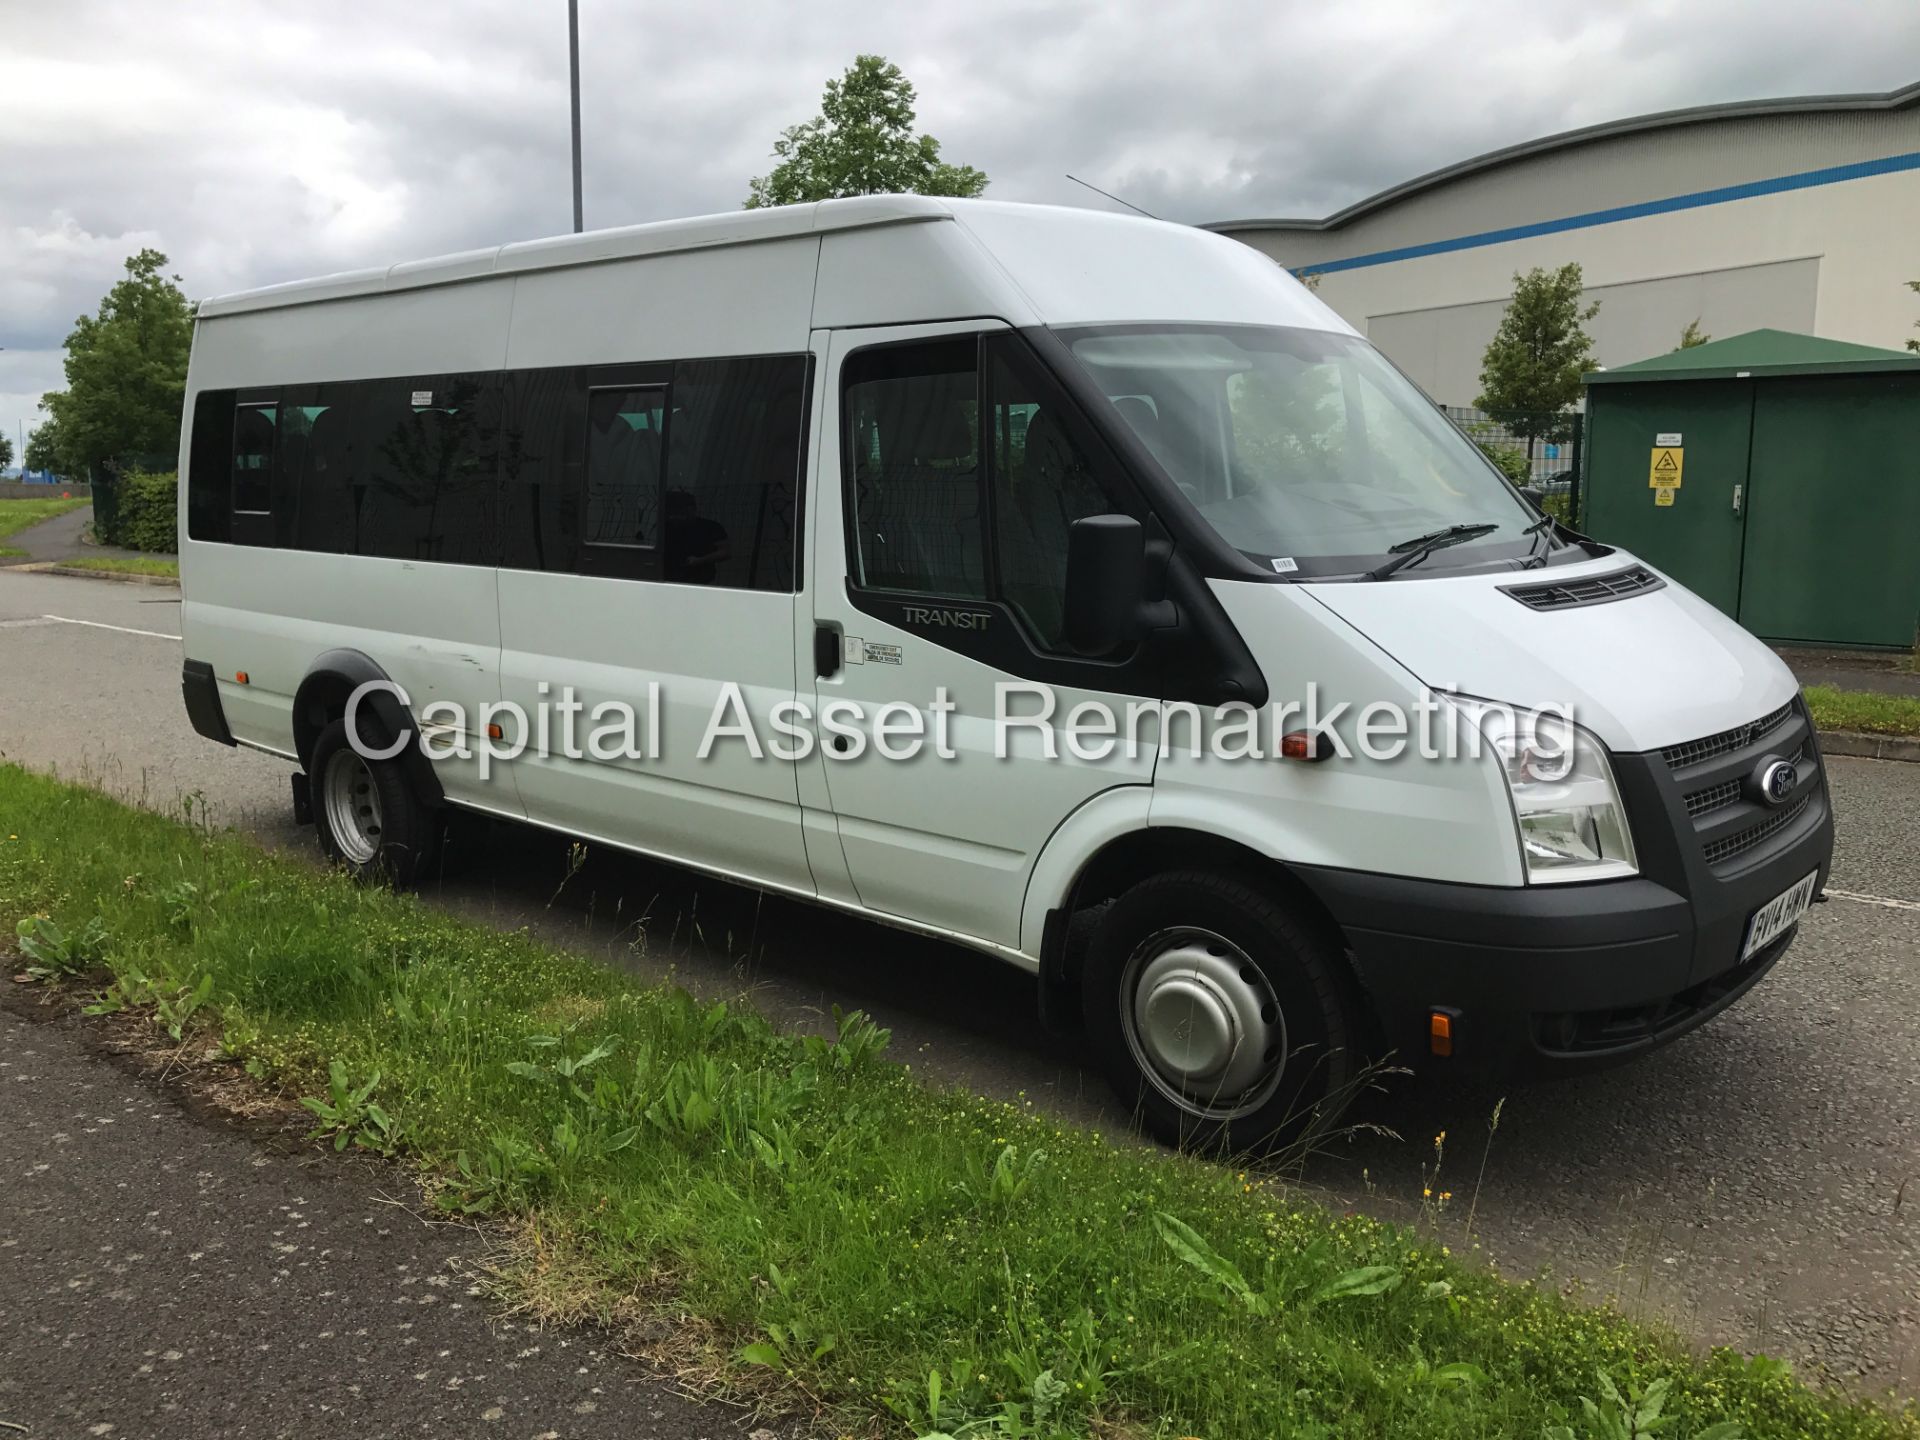 FORD TRANSIT 2.2TDCI (135) - 17 SEATER MINIBUS / COACH - 14 REG - LOW MILES - 1 OWNER - LWB - WOW!!! - Image 7 of 21